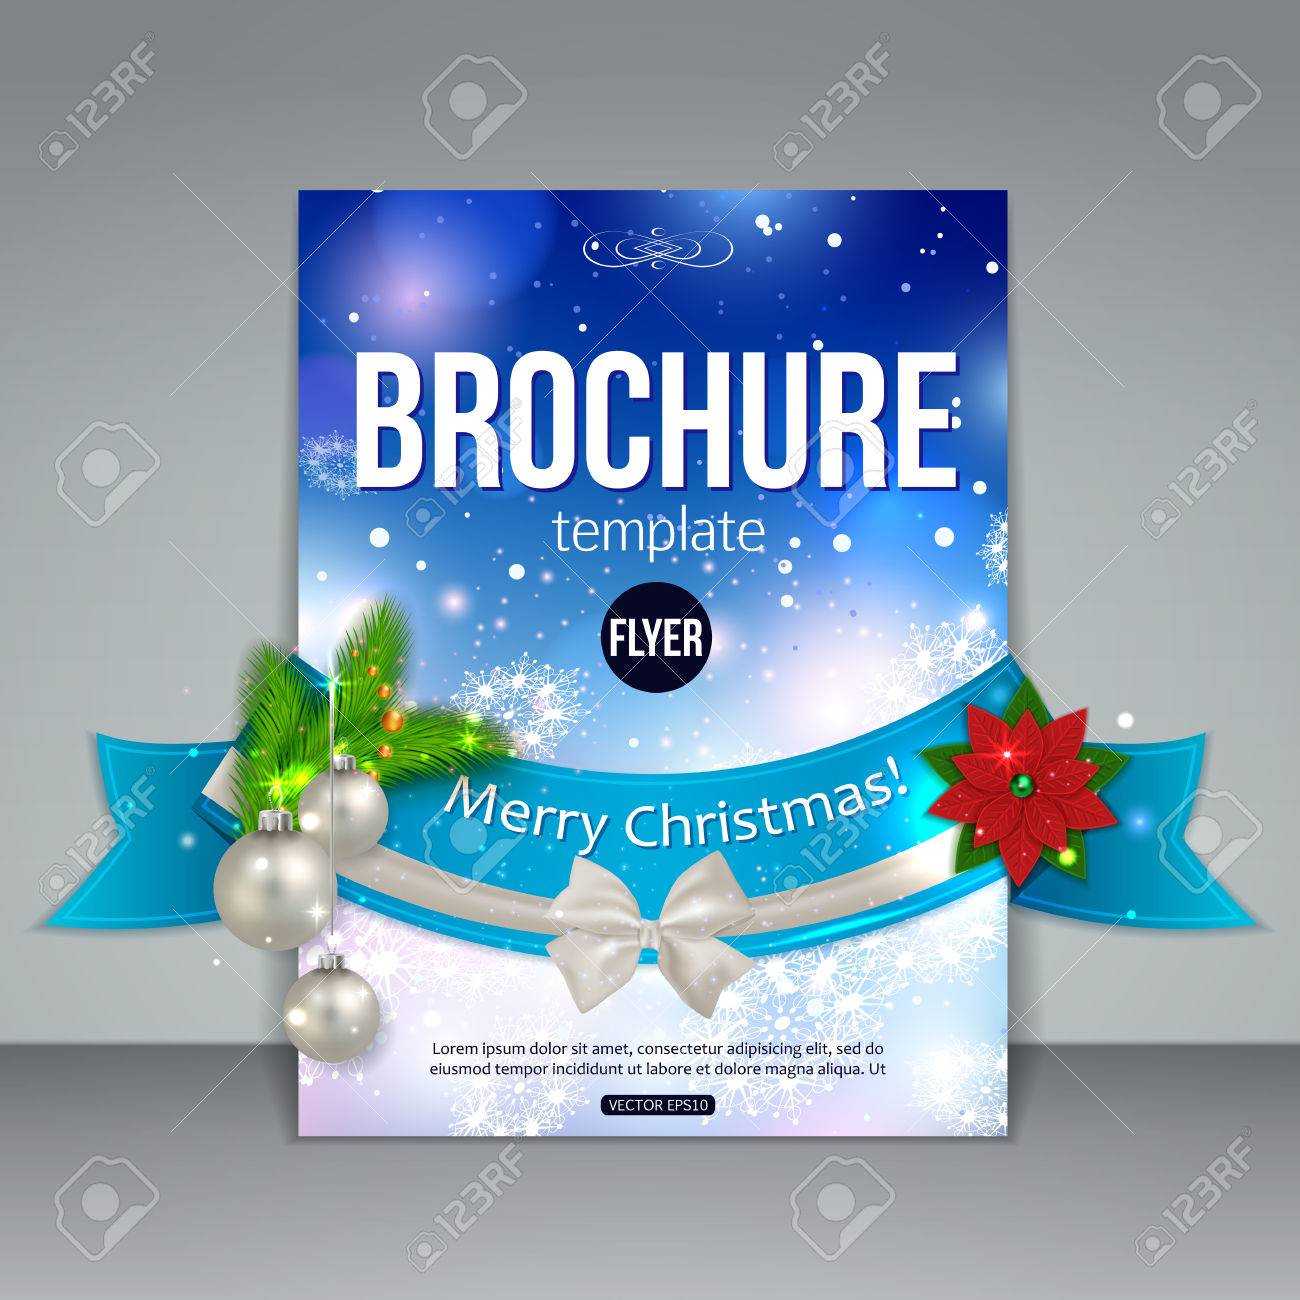 Christmas Brochure Template. Abstract Flyer Design With Xmas.. Throughout Christmas Brochure Templates Free